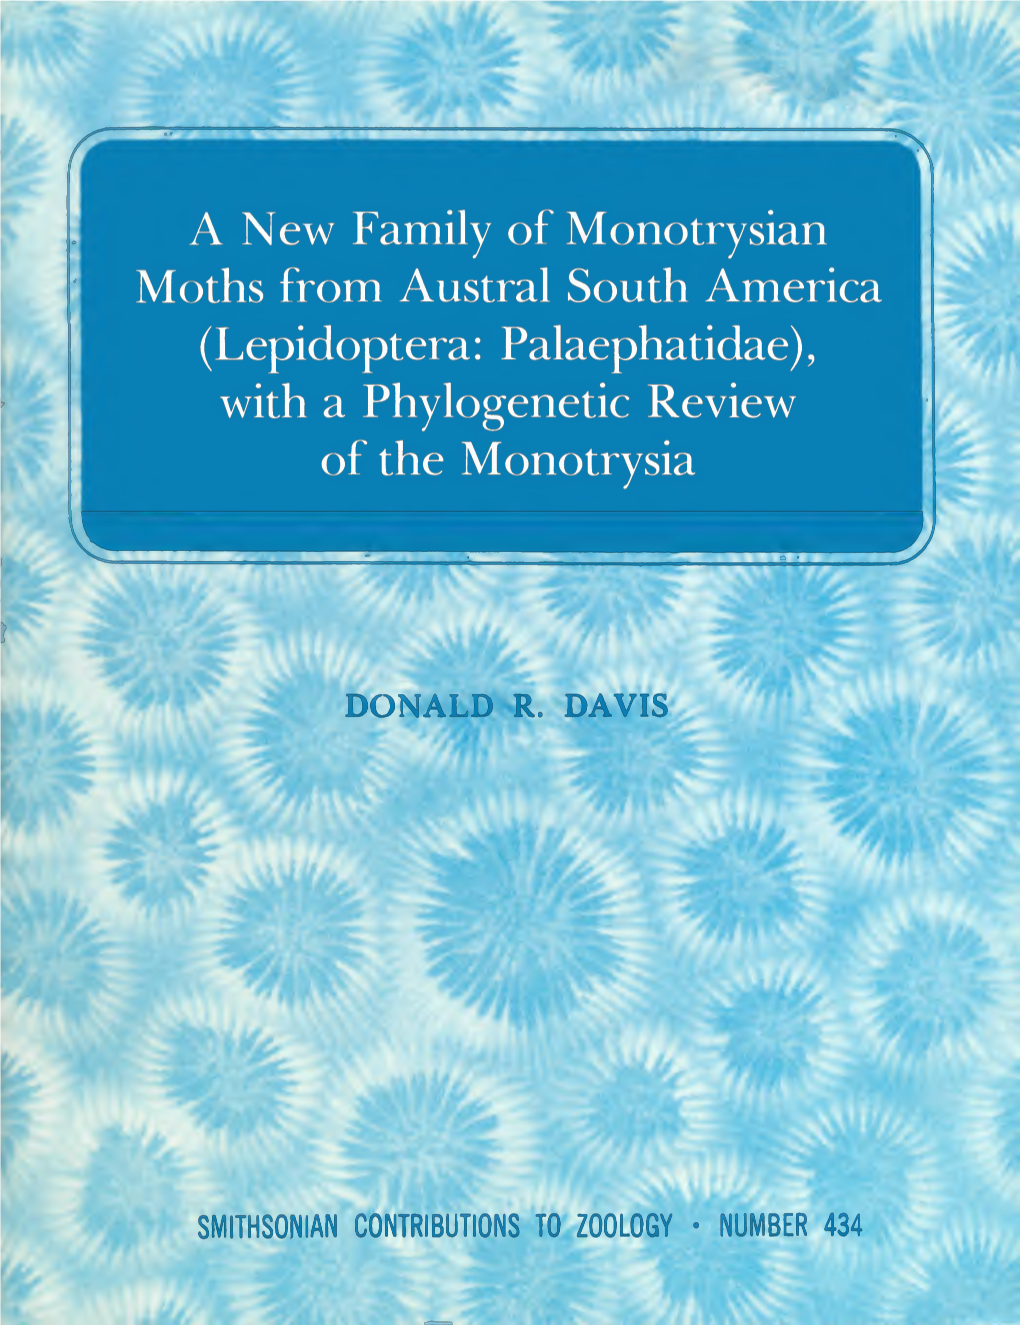 (Lepidoptera: Palaephatidae), with a Phylogenetic Review of the Monotrysia